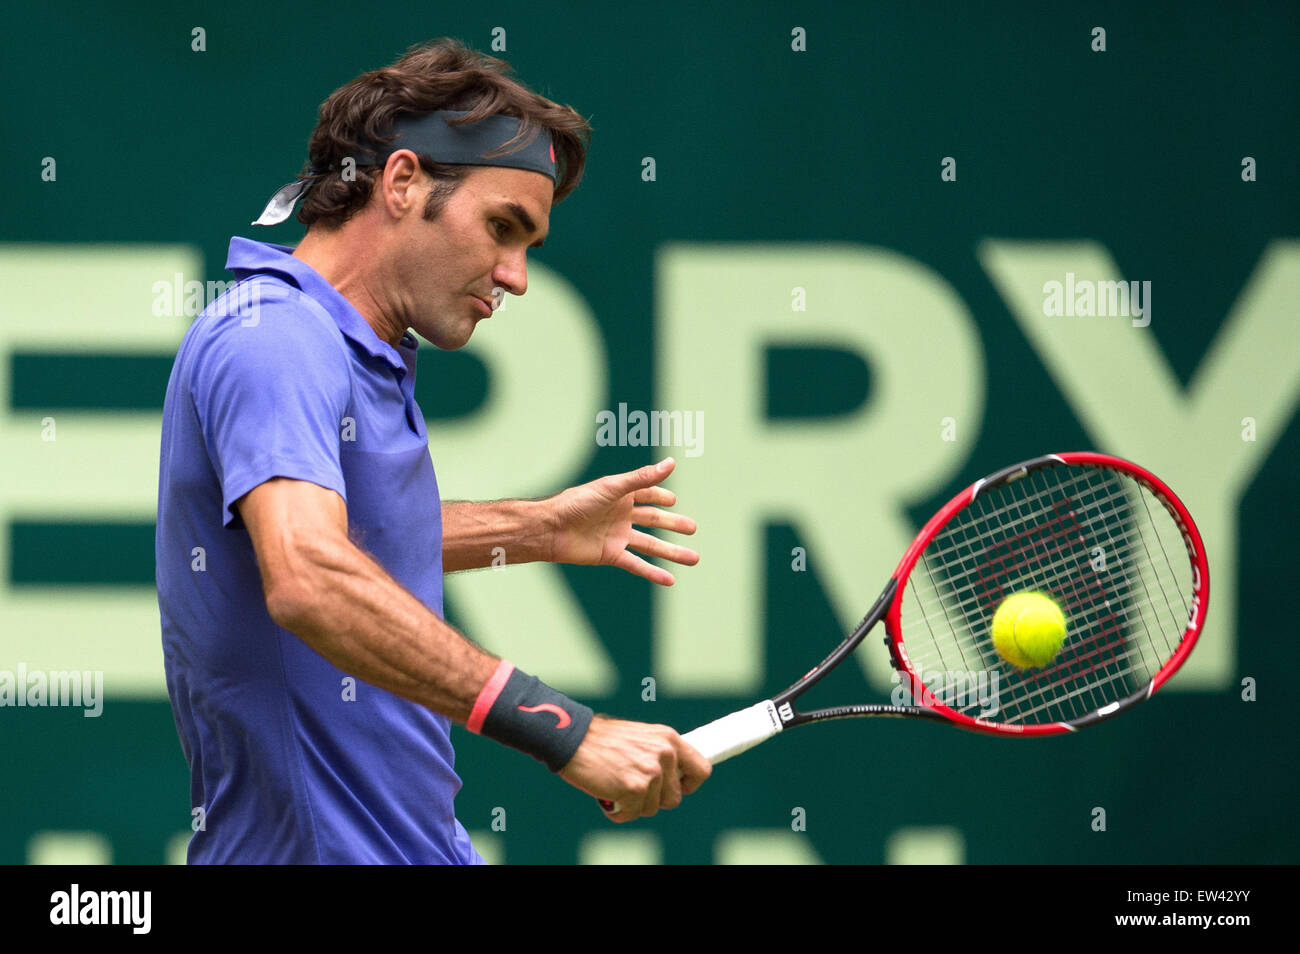 Halle, Germany. 17th June, 2015. Roger Federer of Switzerland in action during the round of 16 match against Gulbis of Latvia at the ATP tennis tournament in Halle, Germany, 17 June 2015. Photo: MAJA HITIJ/dpa/Alamy Live News Stock Photo